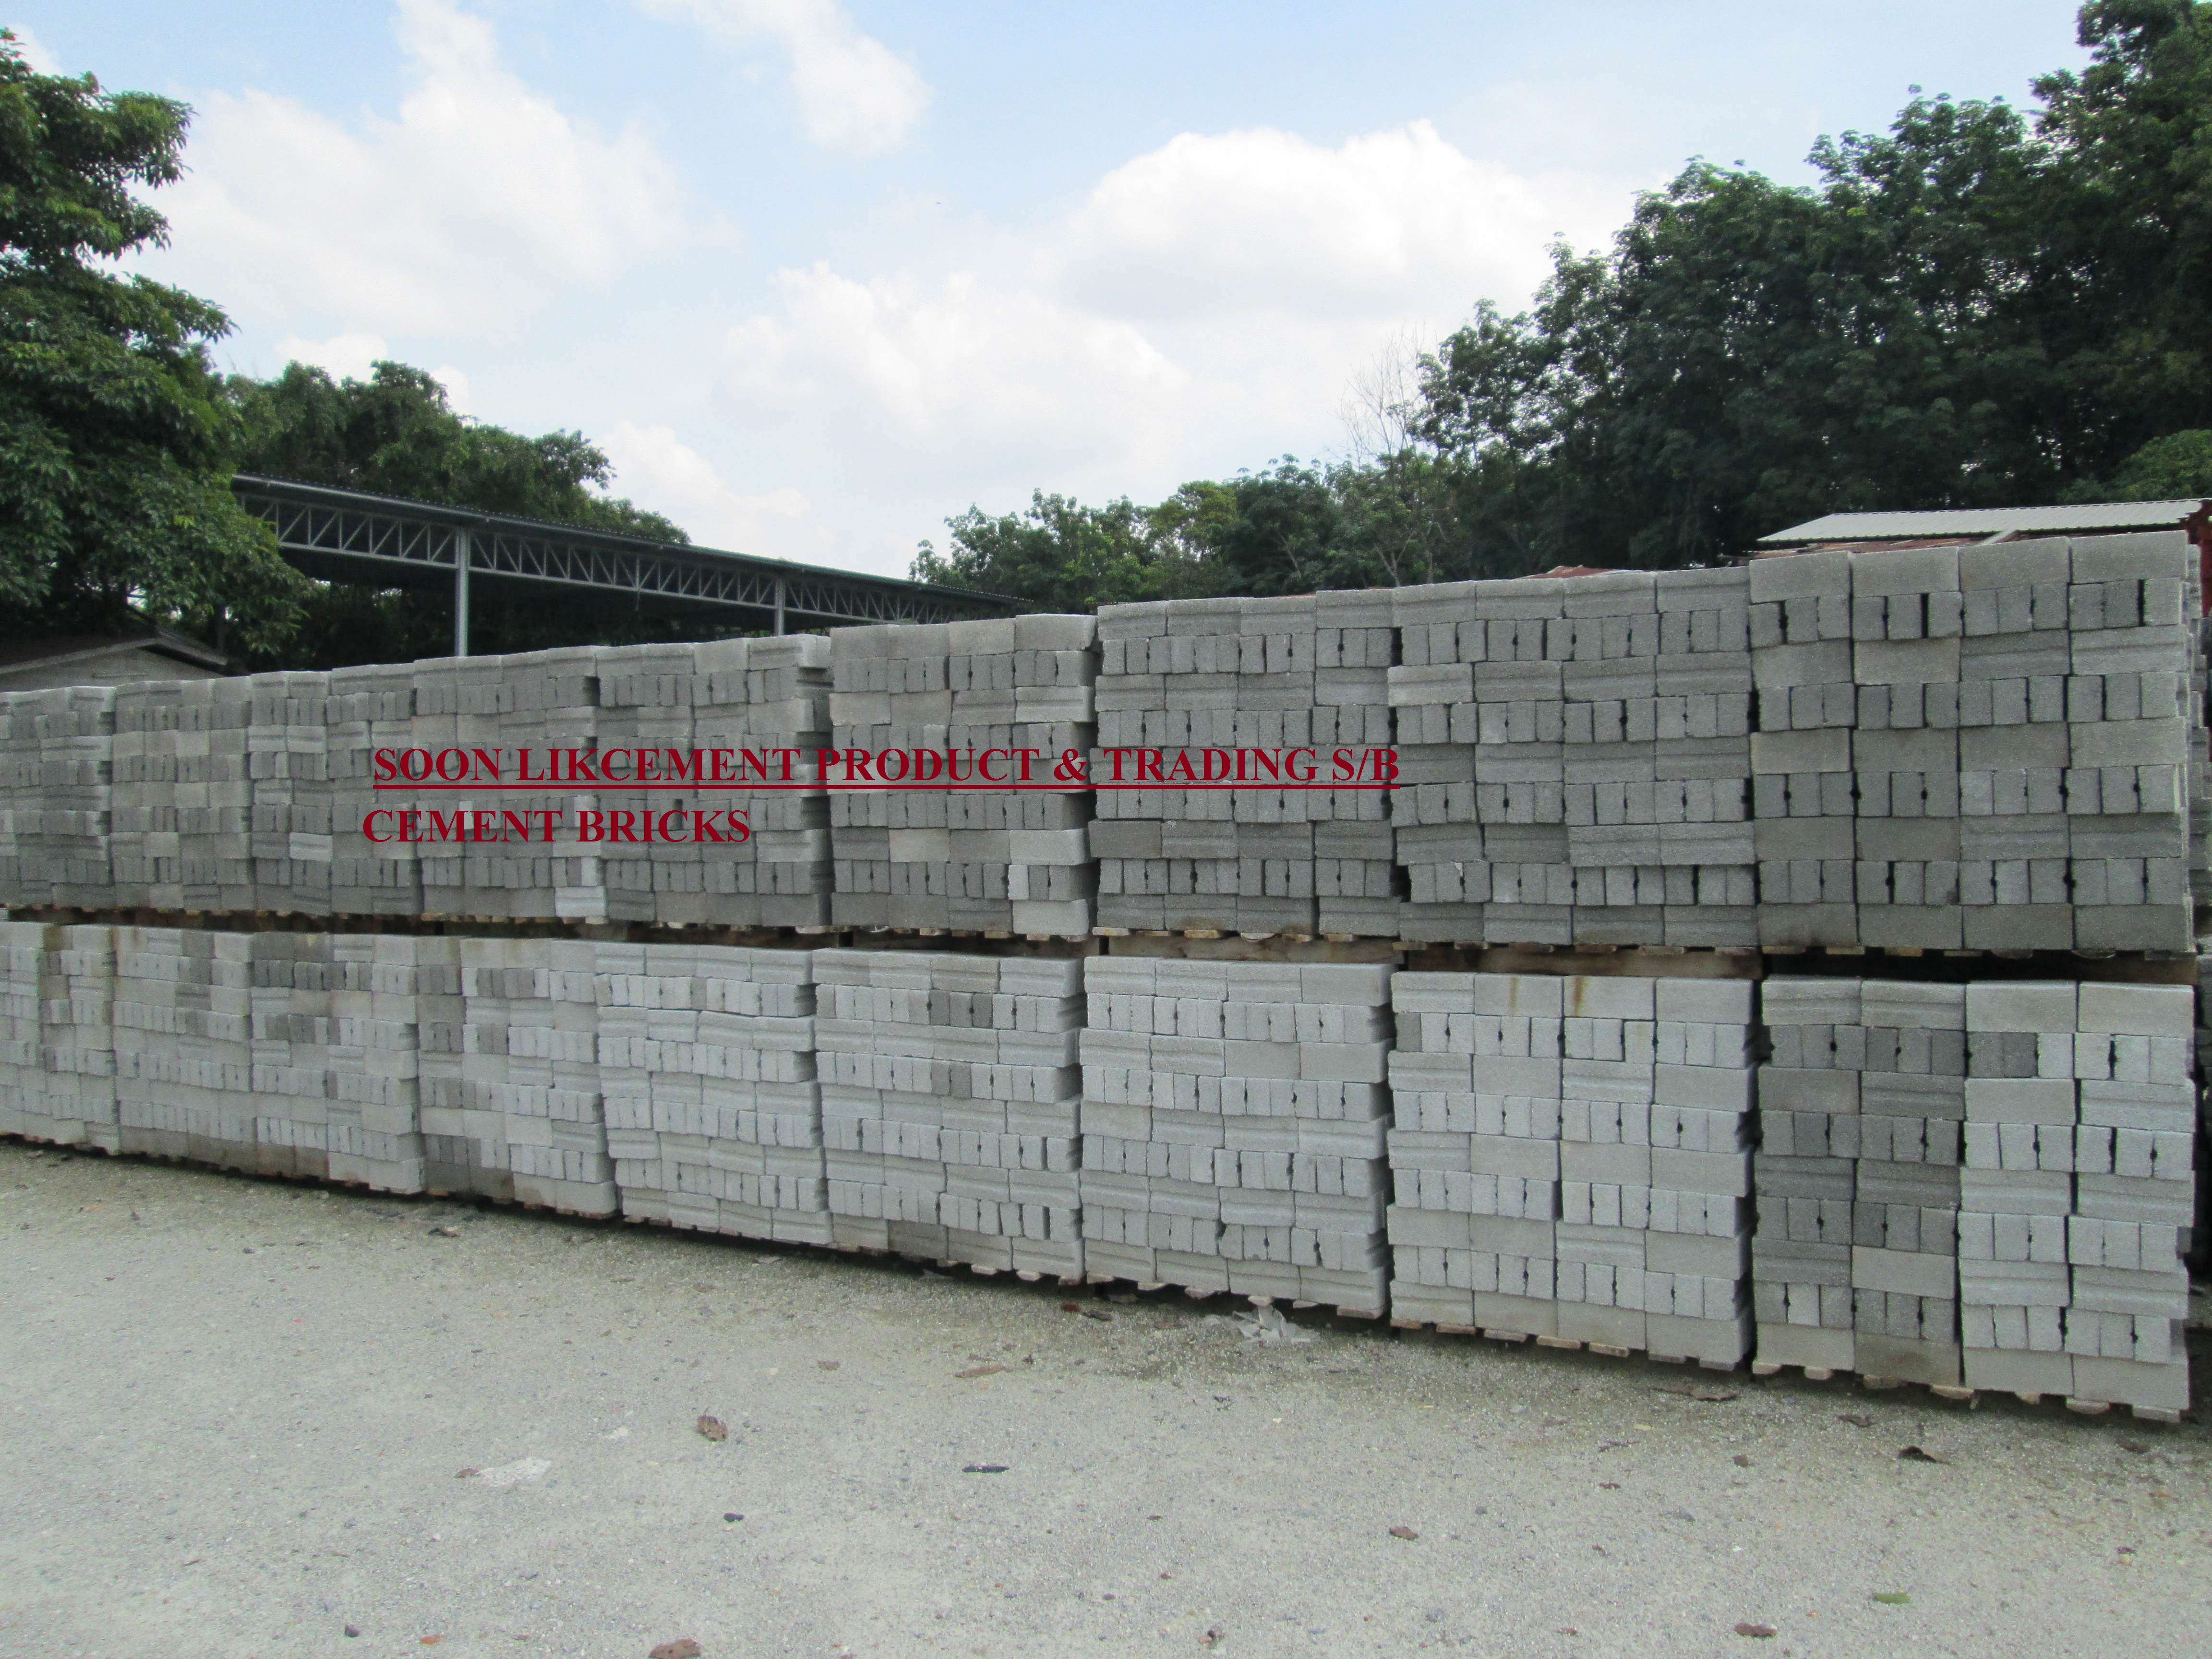 CEMENT BRICK & HOLLOW BLOCK - Soon Lik Cement Product & Trading Sdn Bhd